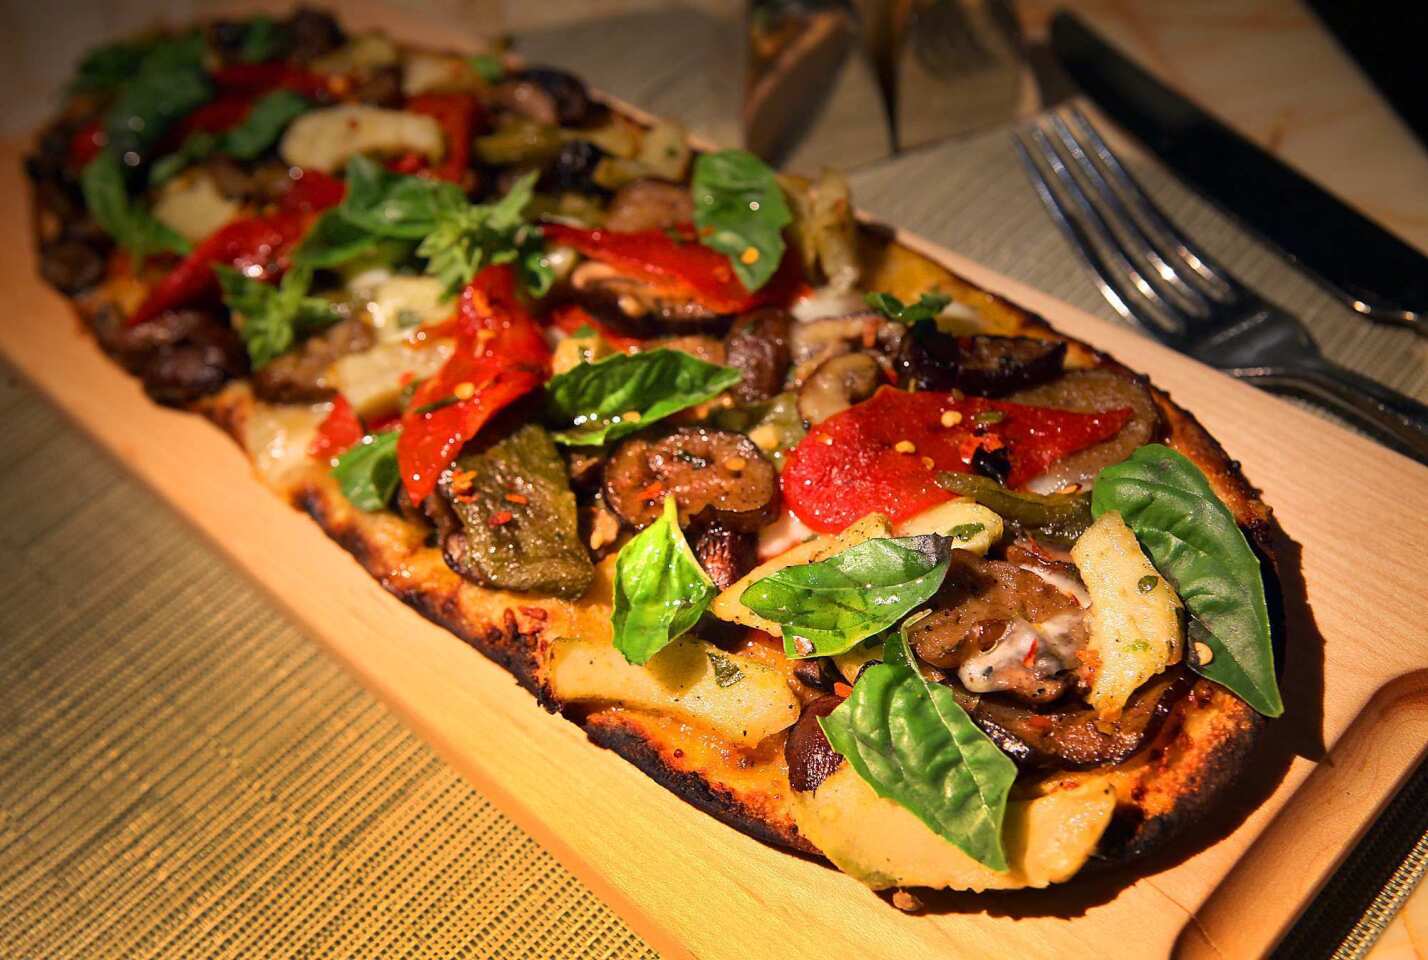 Behold the grilled vegetable flatbread at the Society Café at the Encore in Las Vegas: roasted artichokes, mushrooms, eggplant, peppers and vegan cheese.